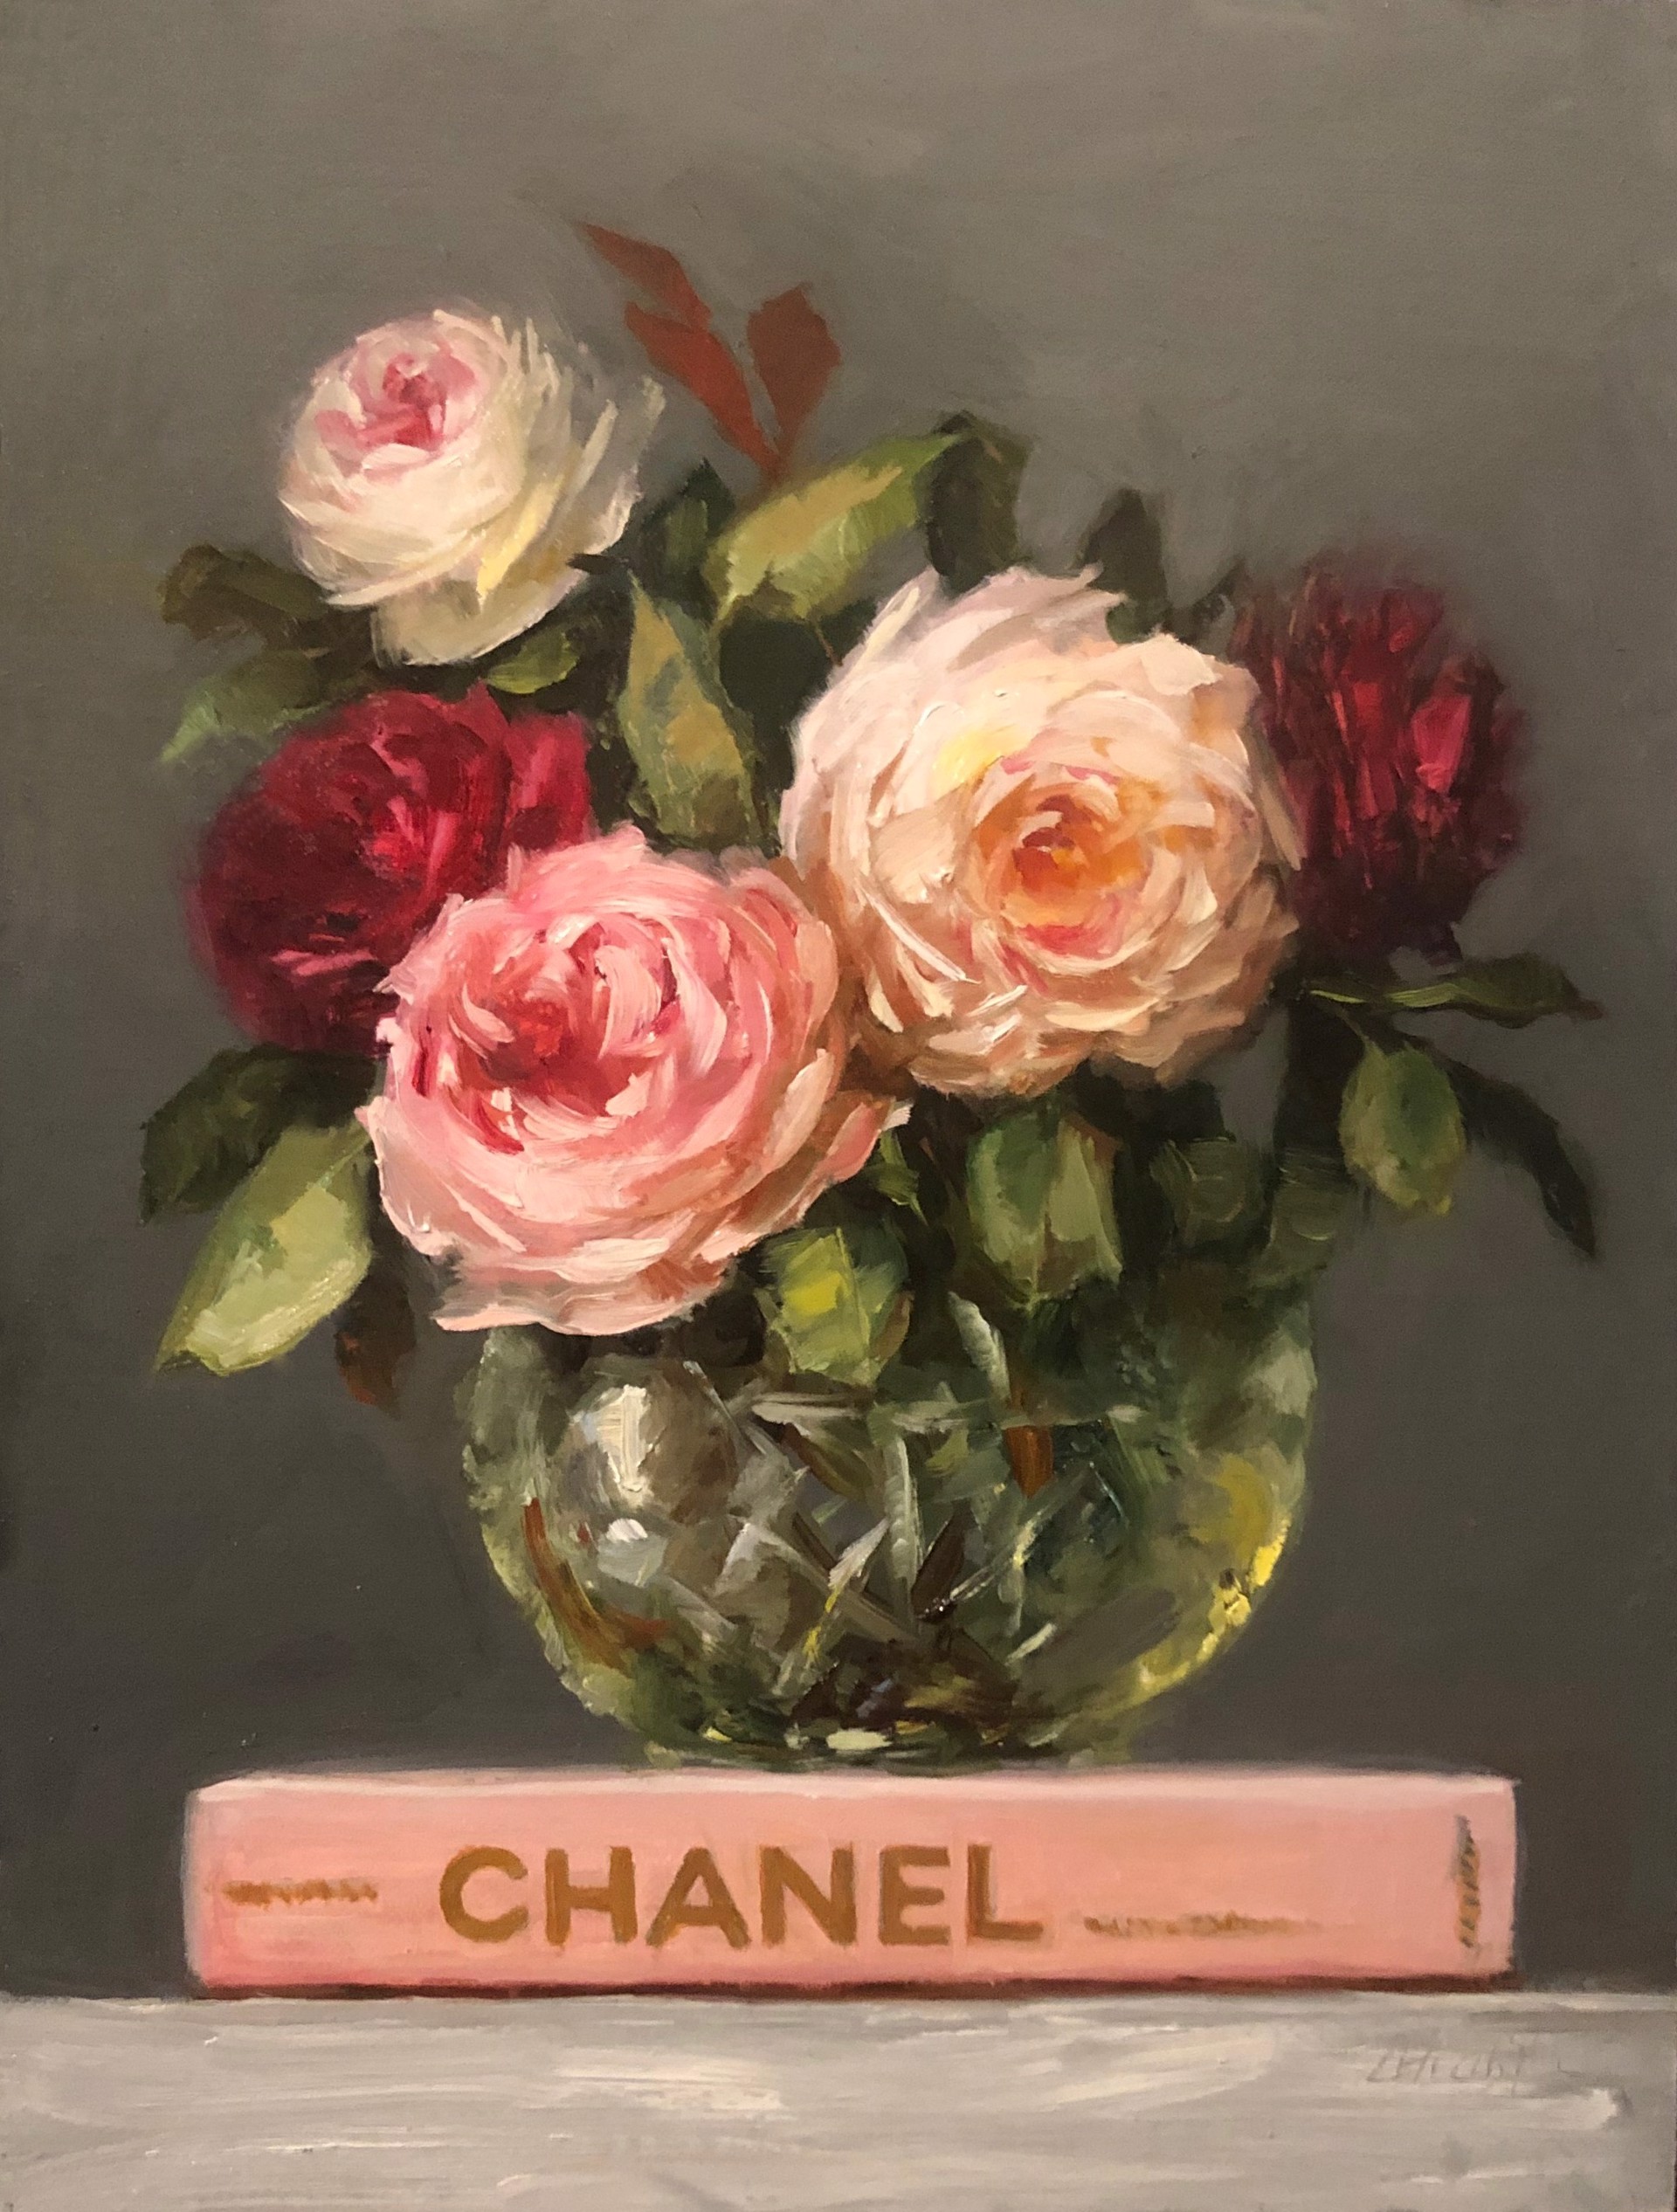 Chanel Book with Rose Posey by Carolina Elizabeth